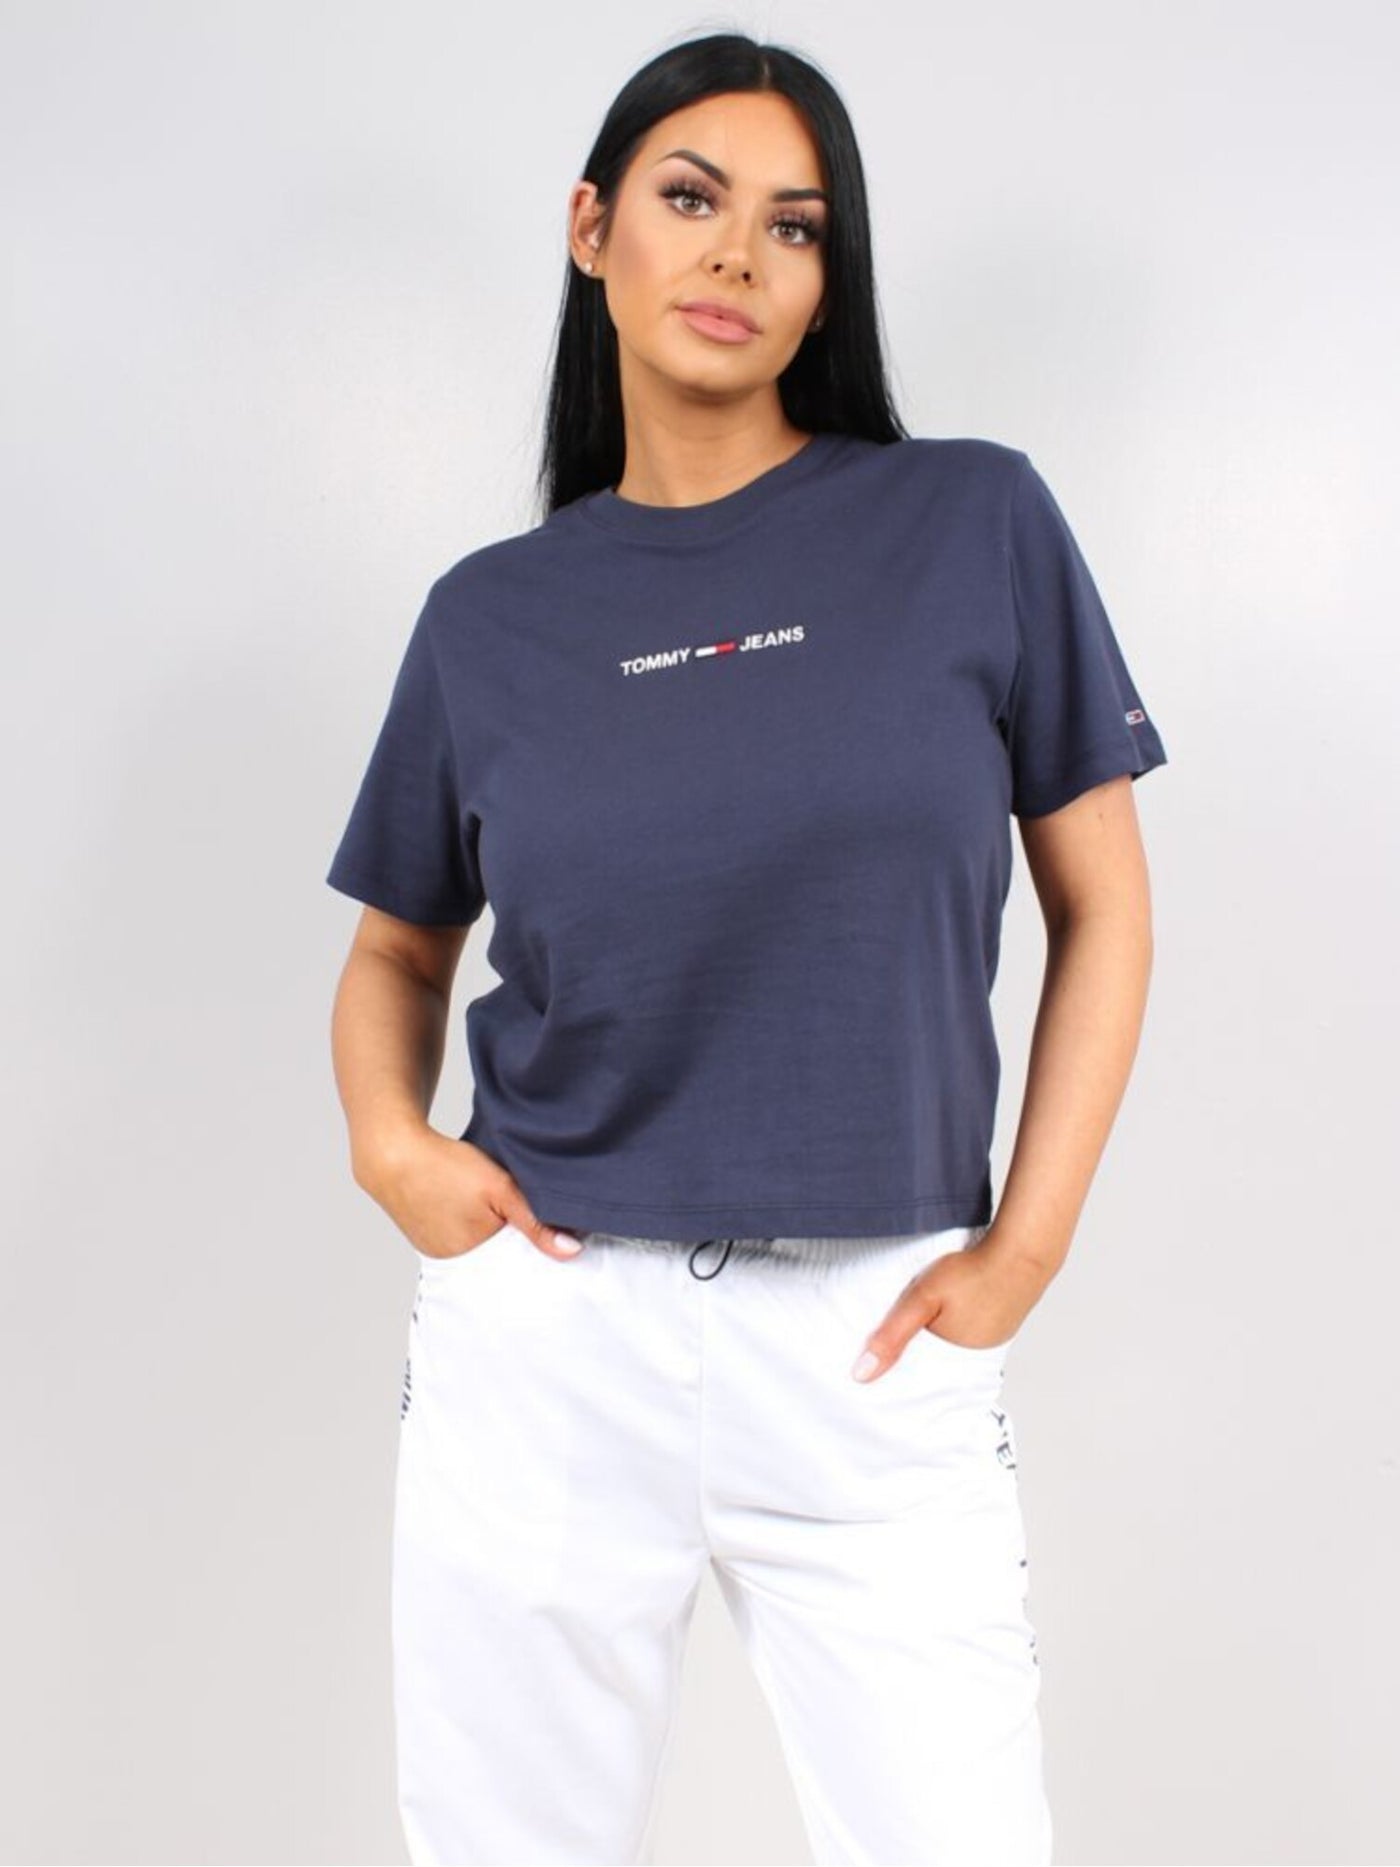 TOMMY HILFIGER SPORT Womens Blue Cotton Blend Ribbed Embroidered Logo Graphic Short Sleeve Crew Neck T-Shirt Plus 1X